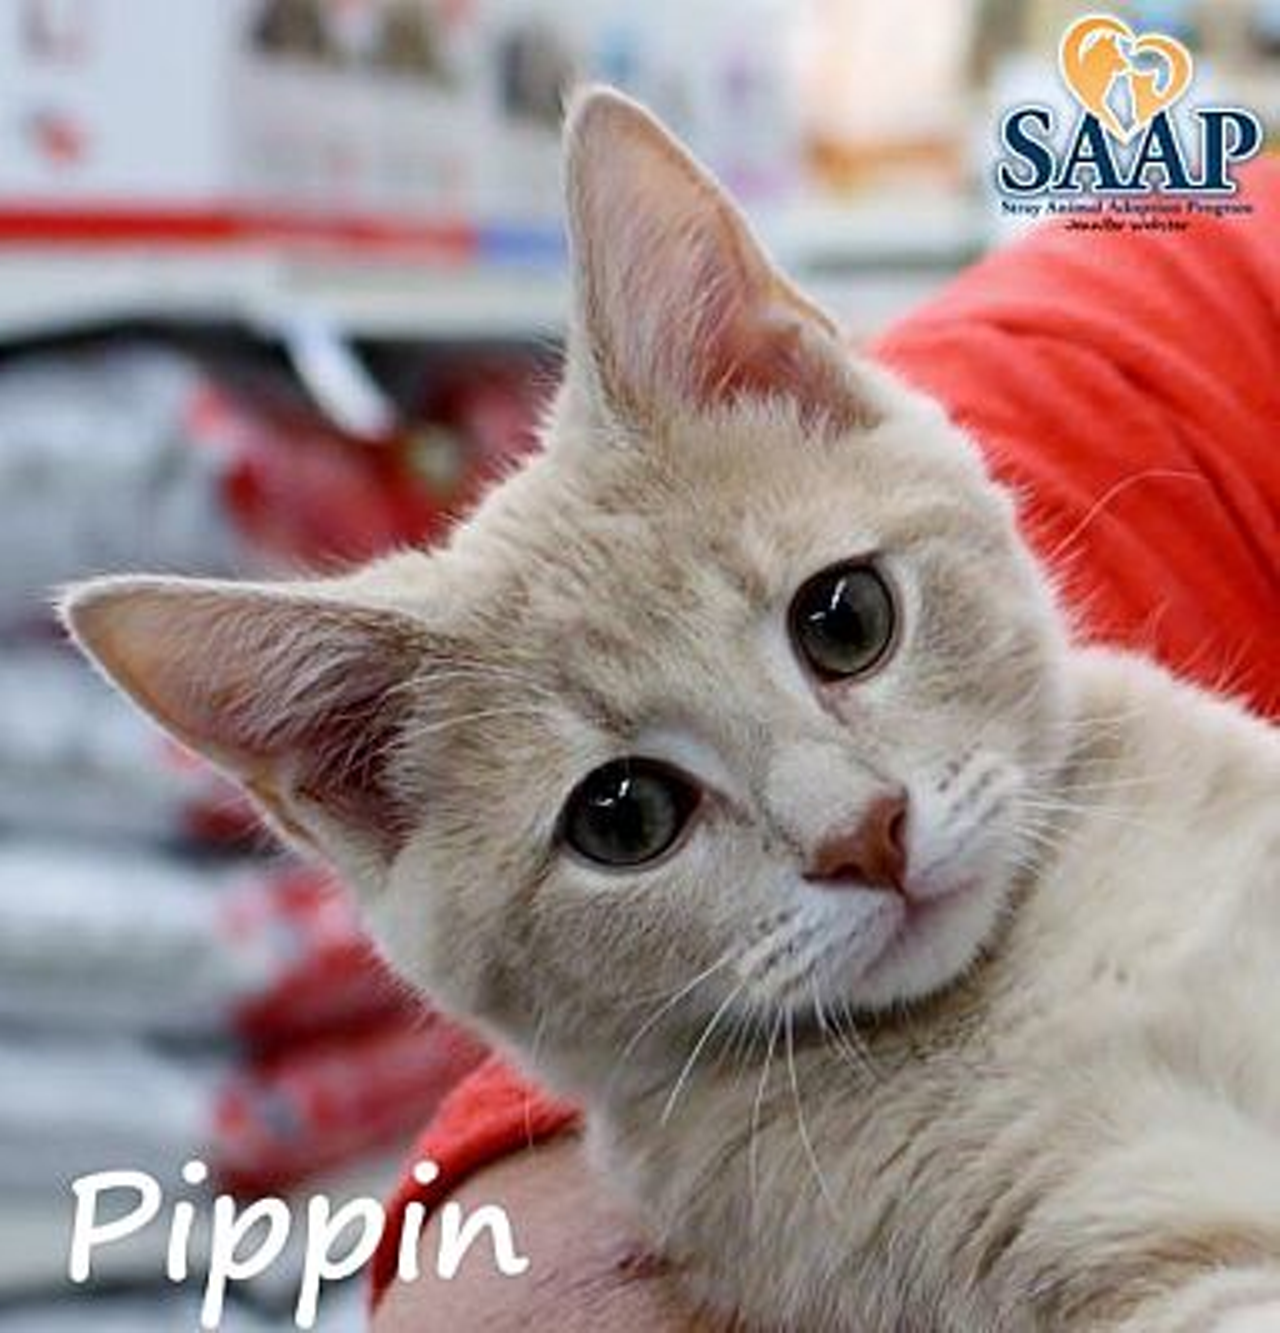 Name: Pippin | Breed: Domestic Shorthair | Age: Kitten | Sex: Male | Rescue: SAAP